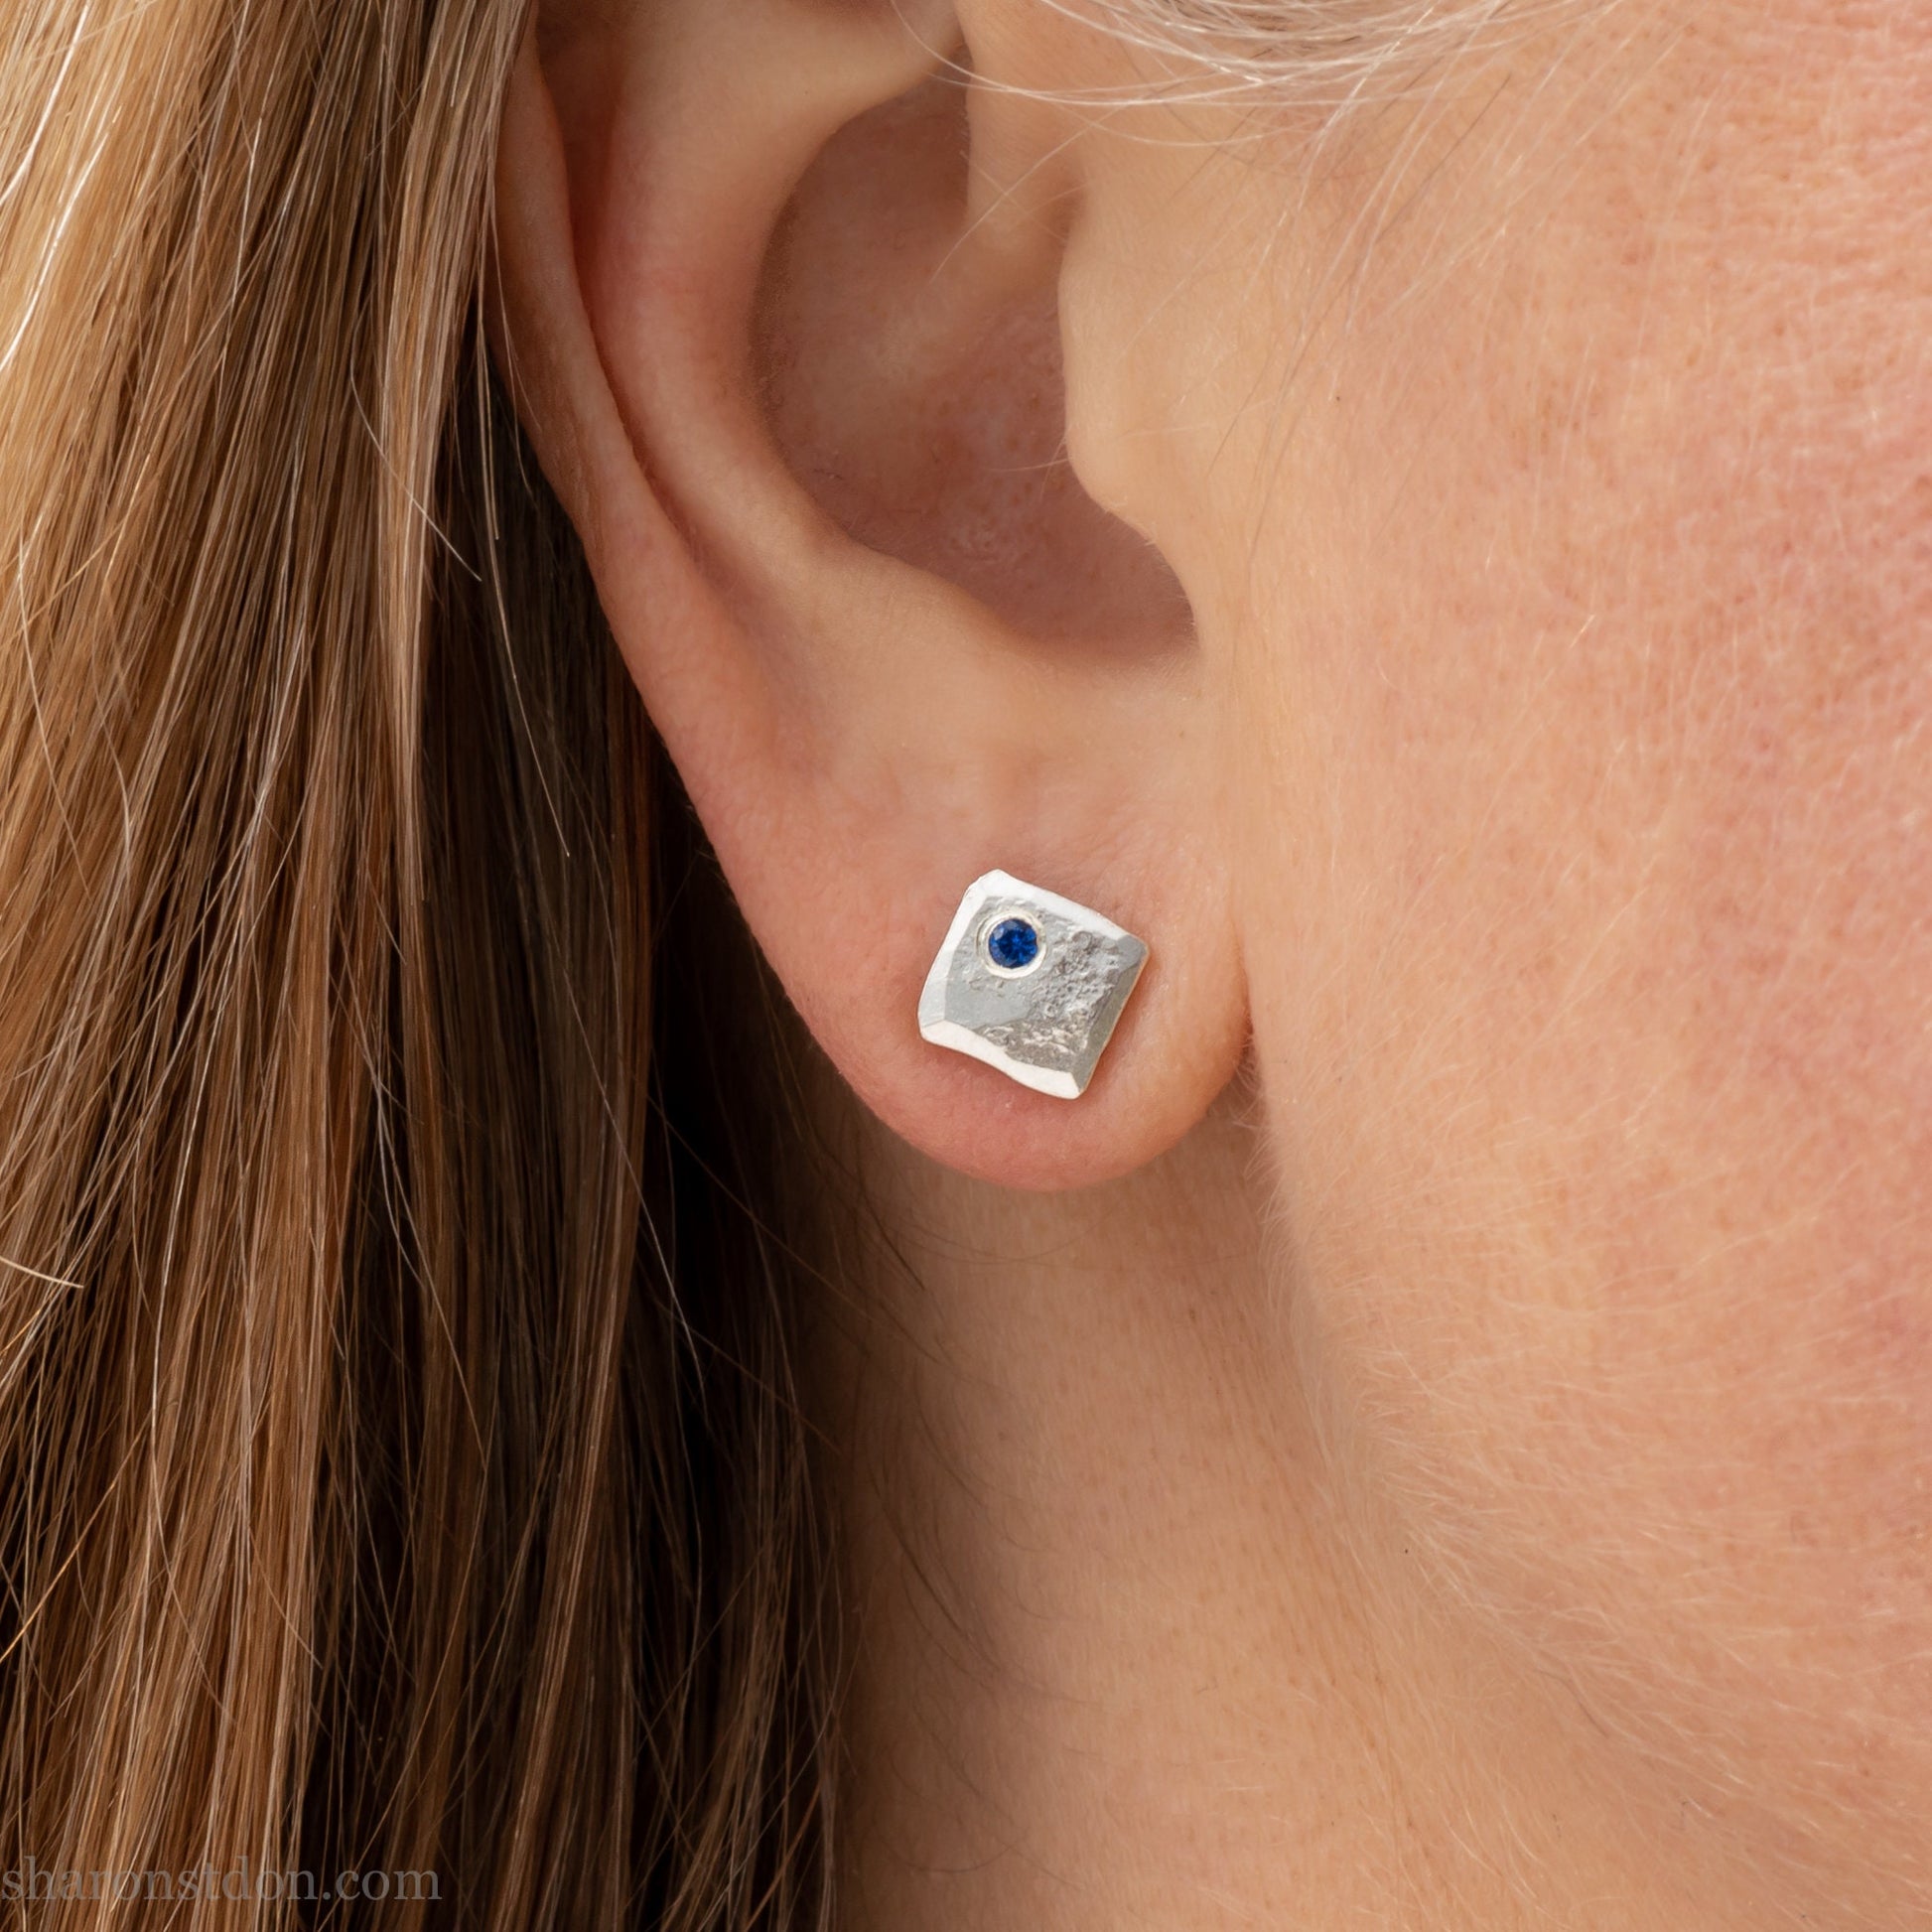 Handmade 925 sterling silver stud earrings  for women with blue spinel gemstones. Daily wear small 7mm square stud earrings made by Sharon SaintDon in North America.